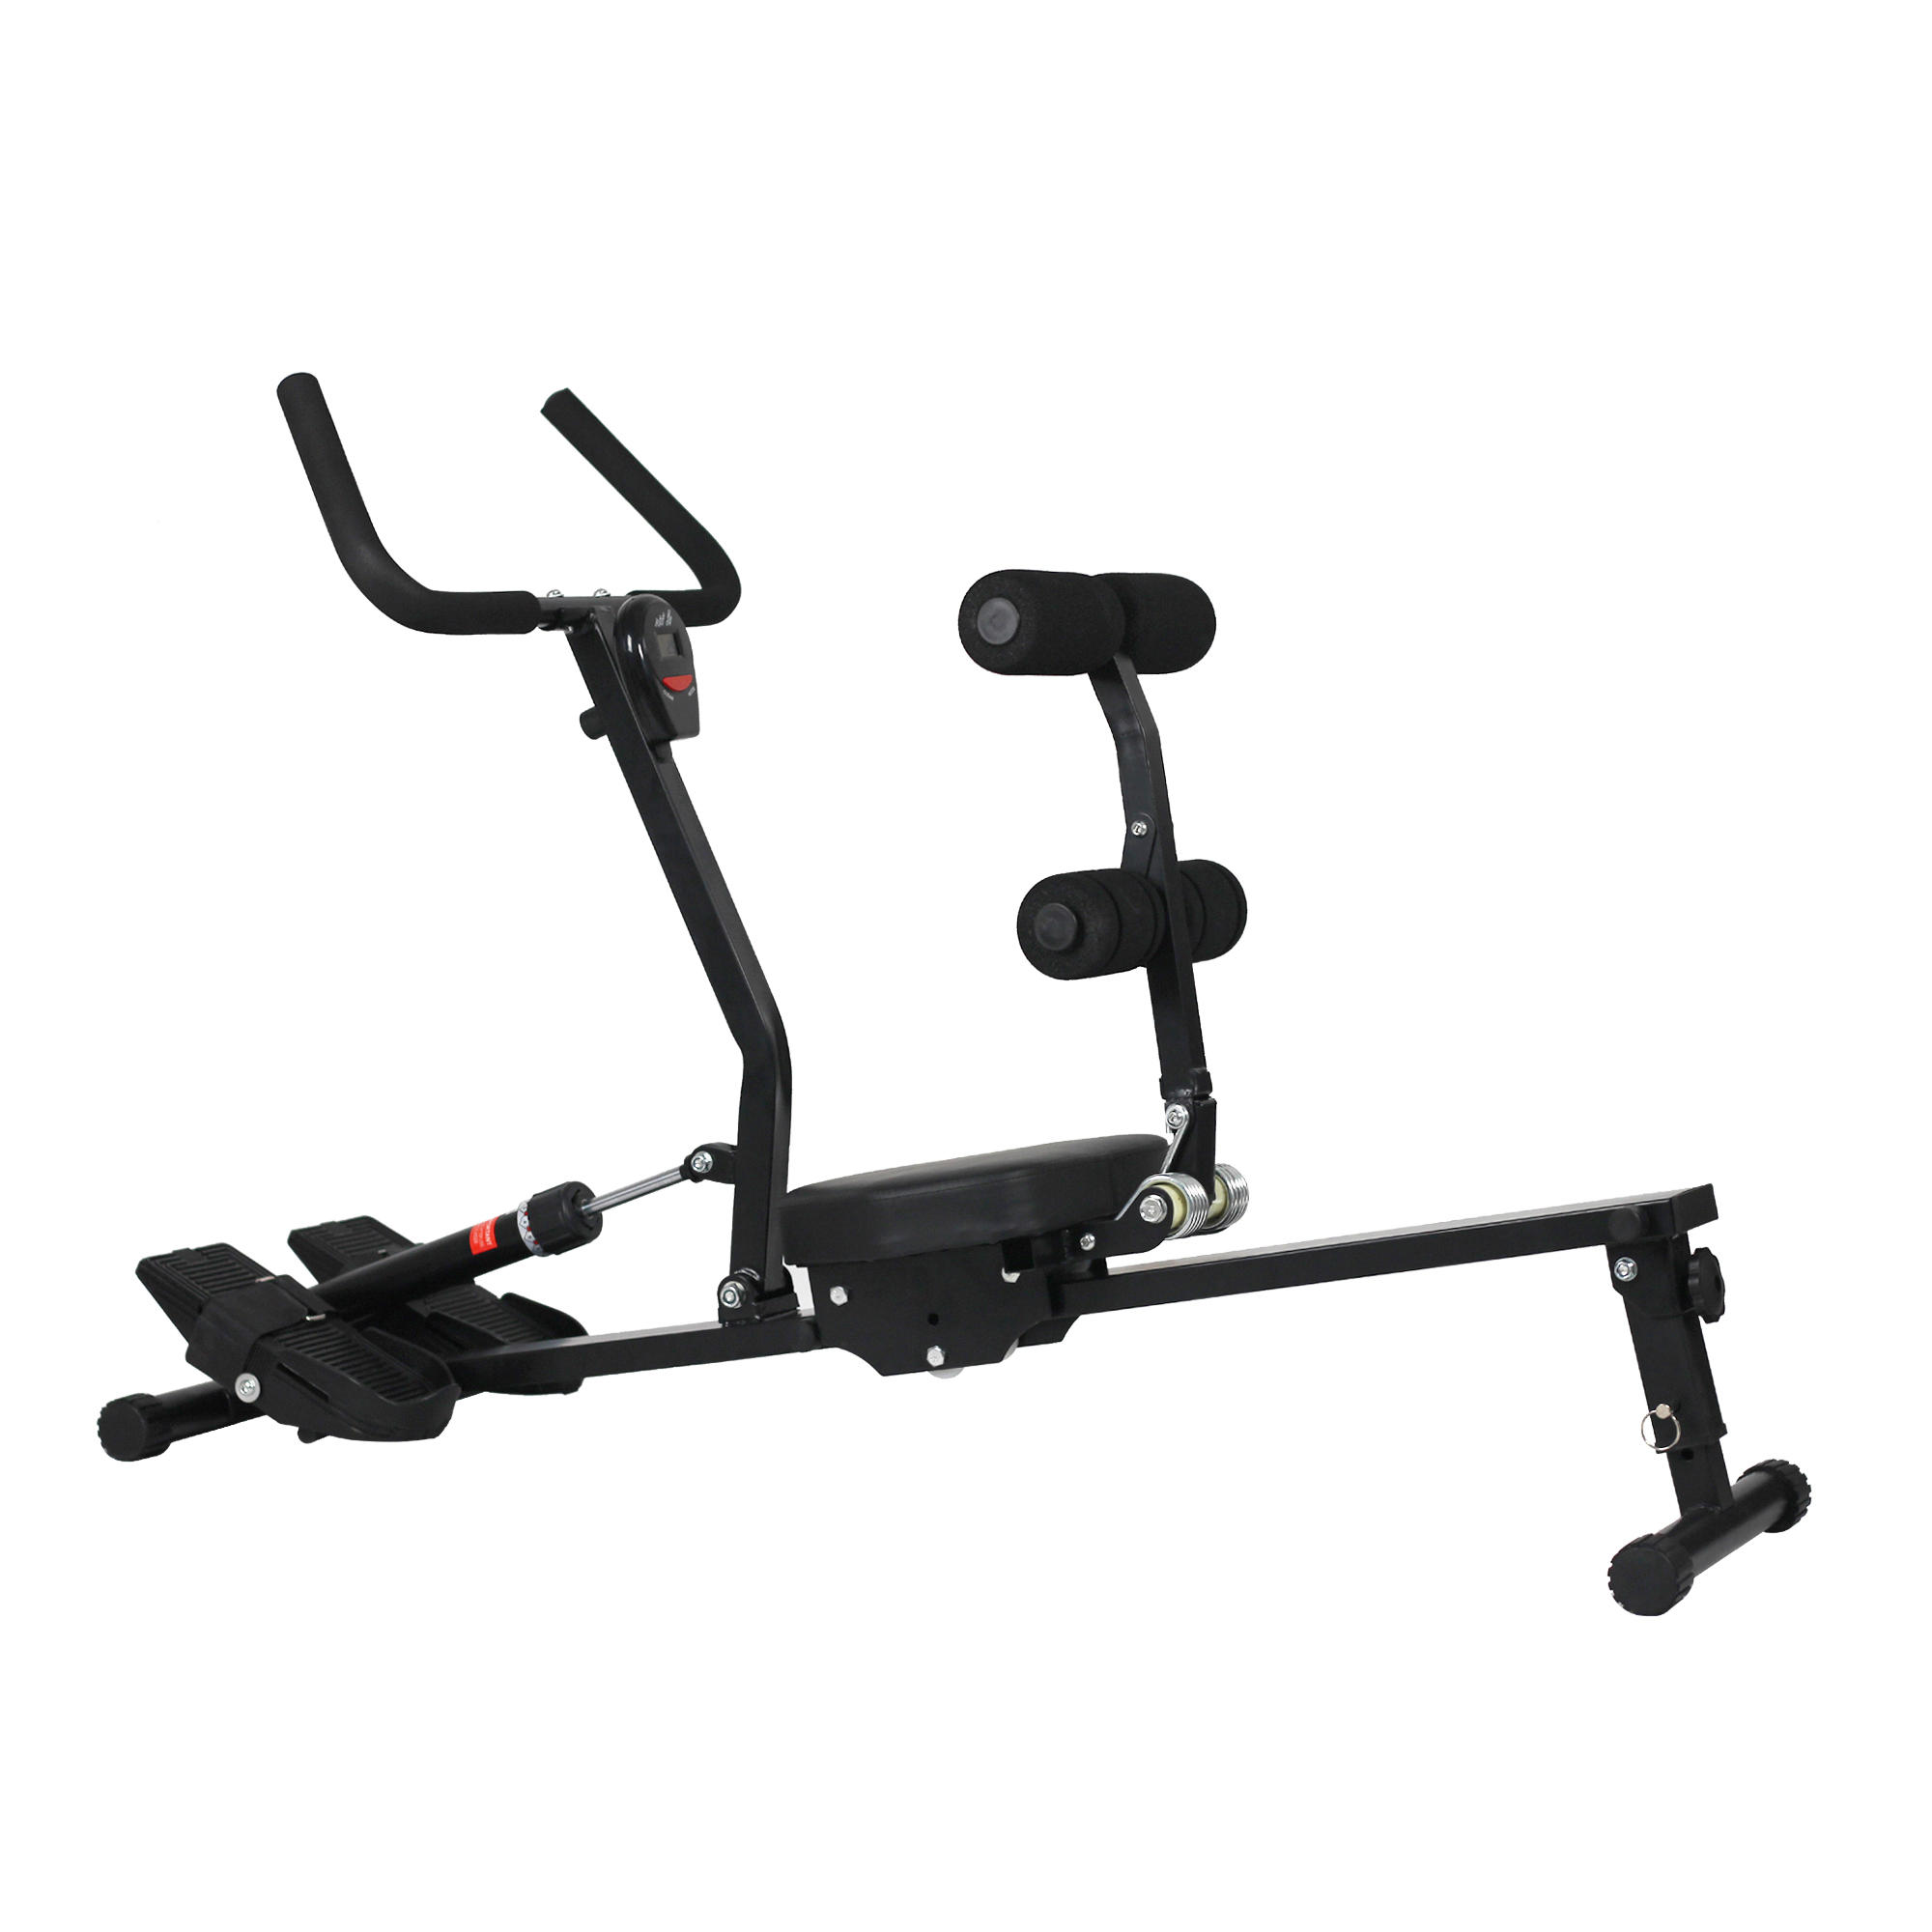 Redefining Home Fitness with the Double Handle Rowing Machine